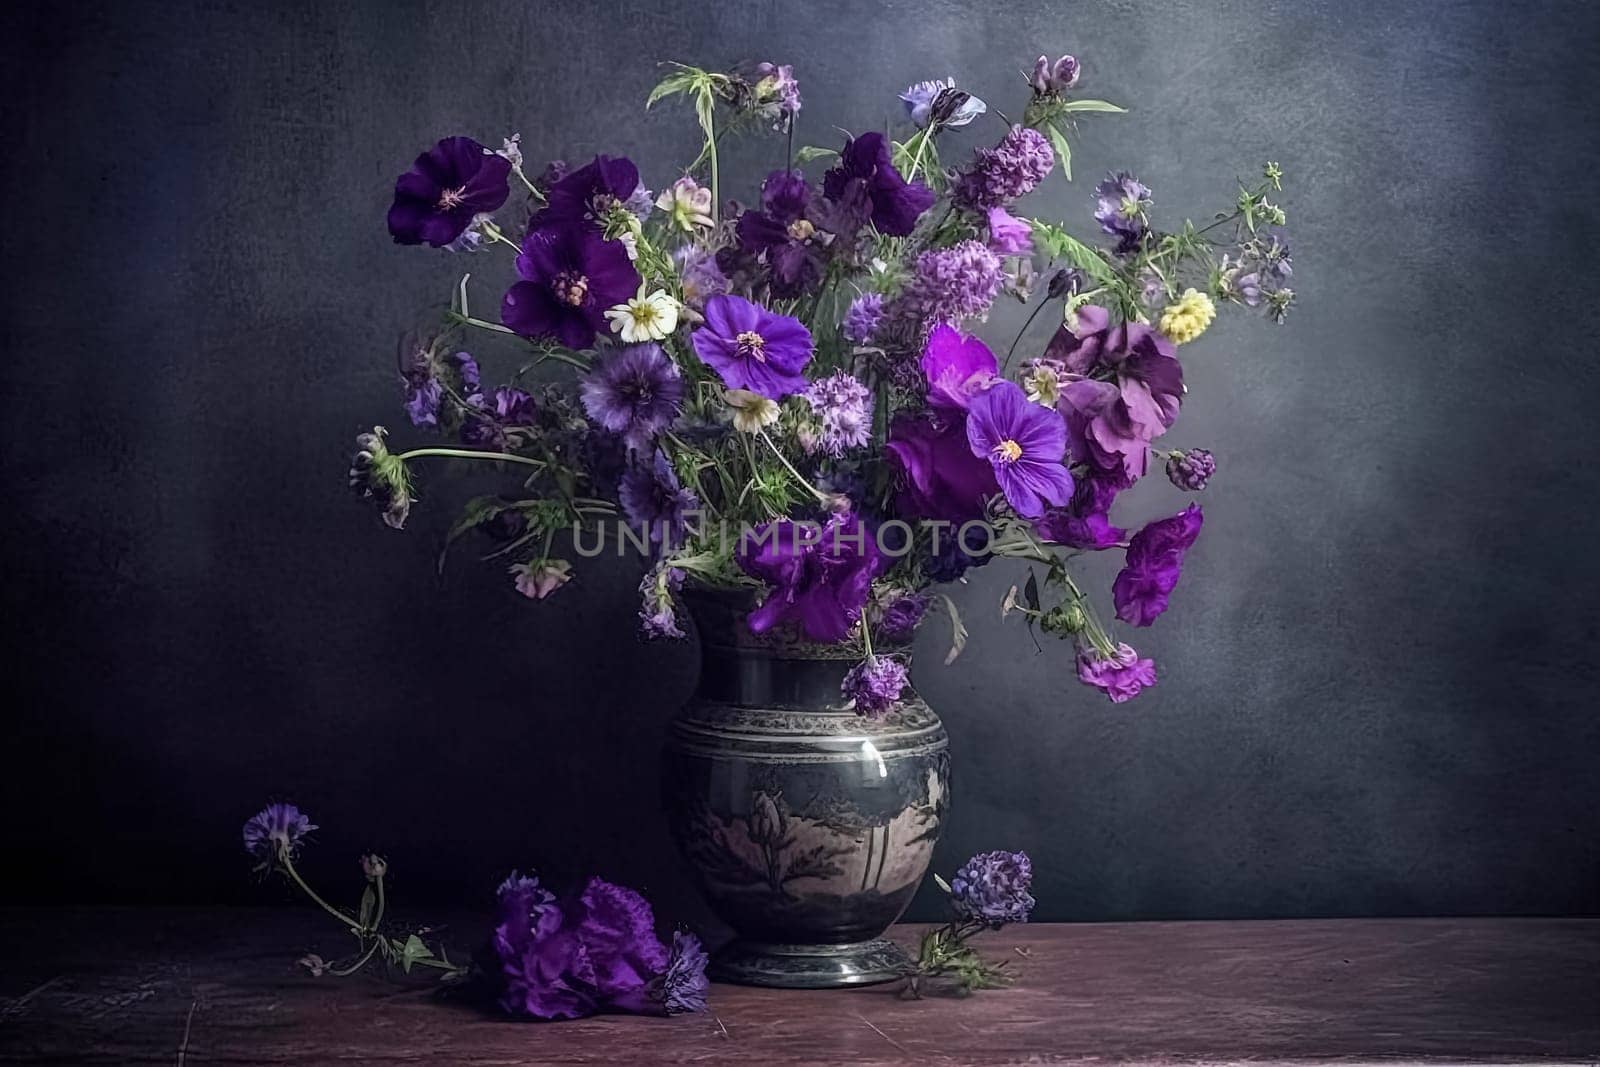 A vase of purple flowers sits on a table with a purple cloth. The scene is serene and calming, with the purple flowers adding a touch of color